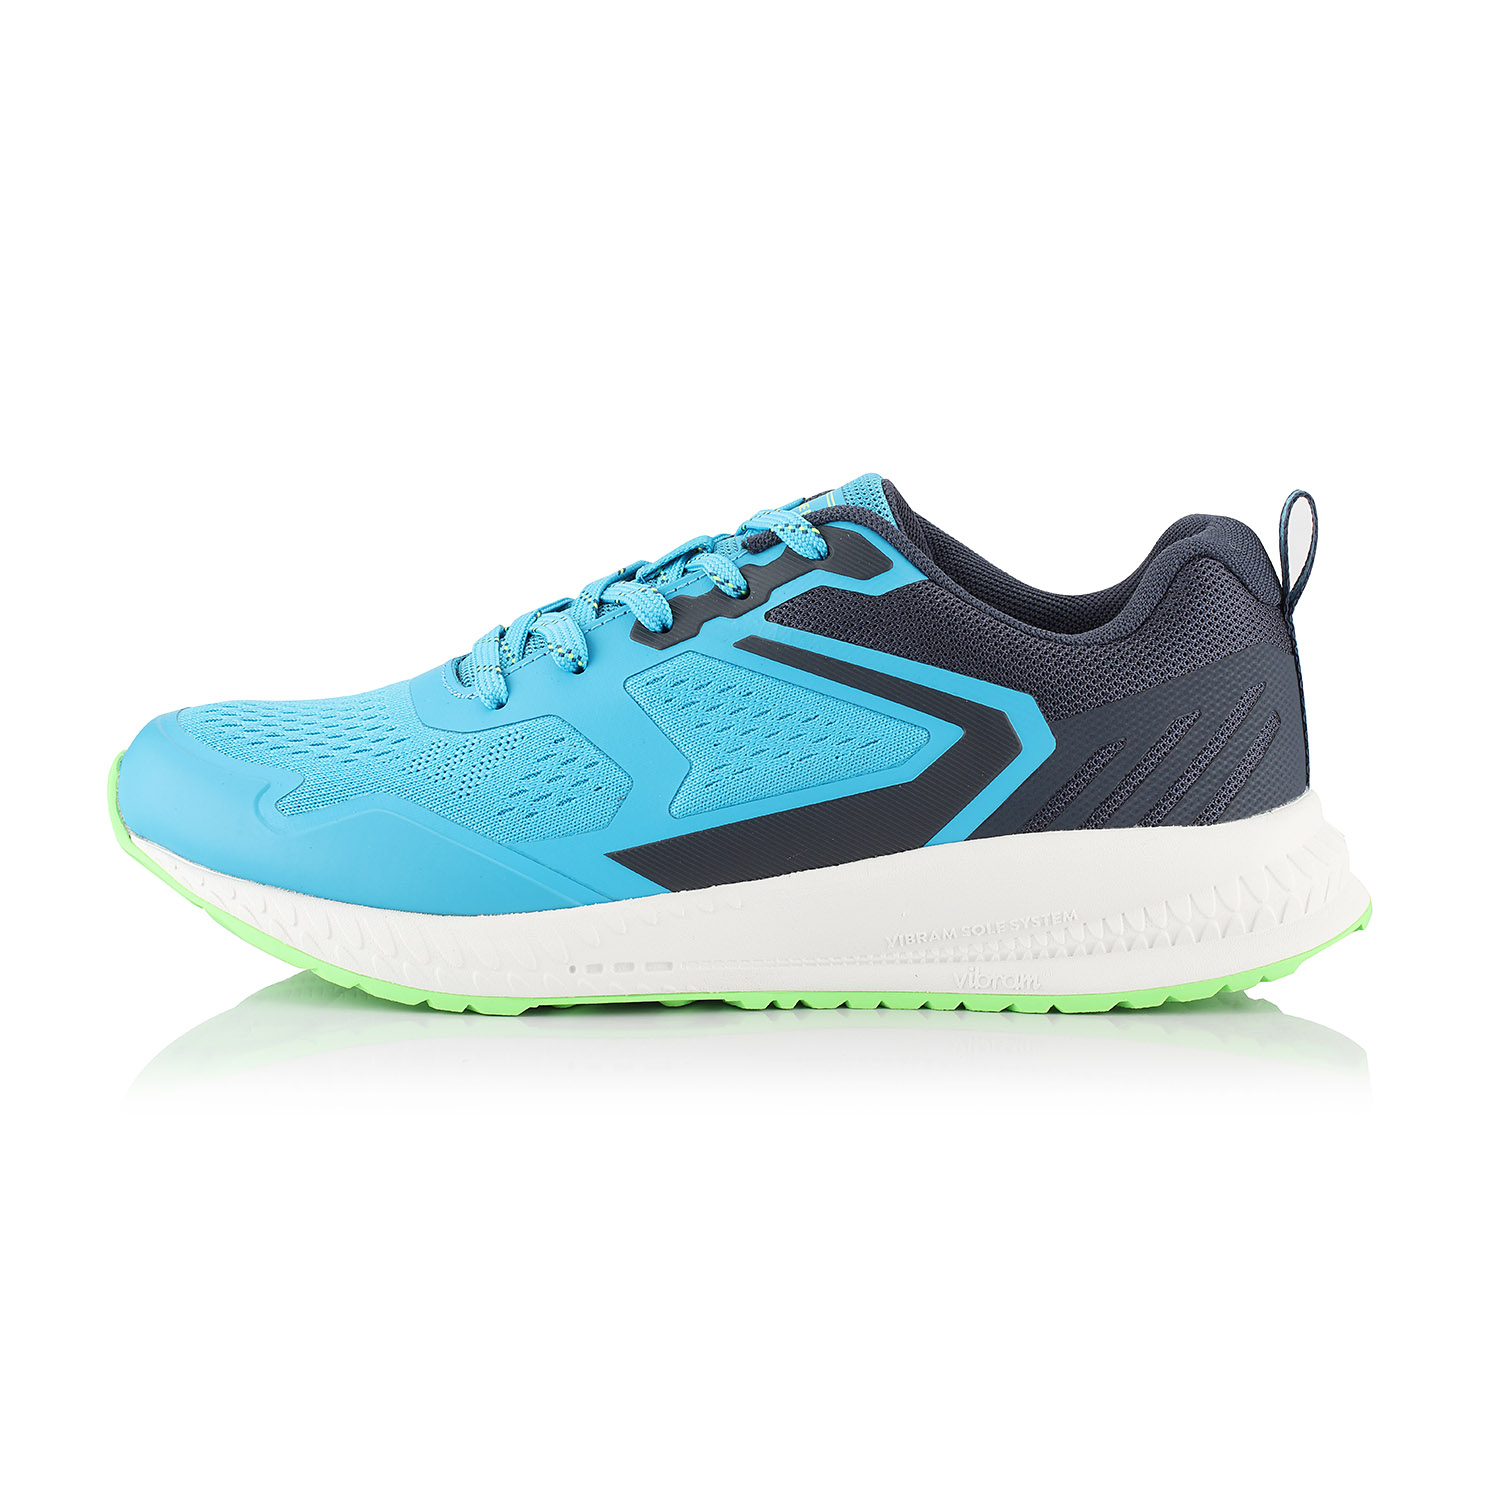 Sport running shoes with antibacterial insole ALPINE PRO NAREME neon atomic blue